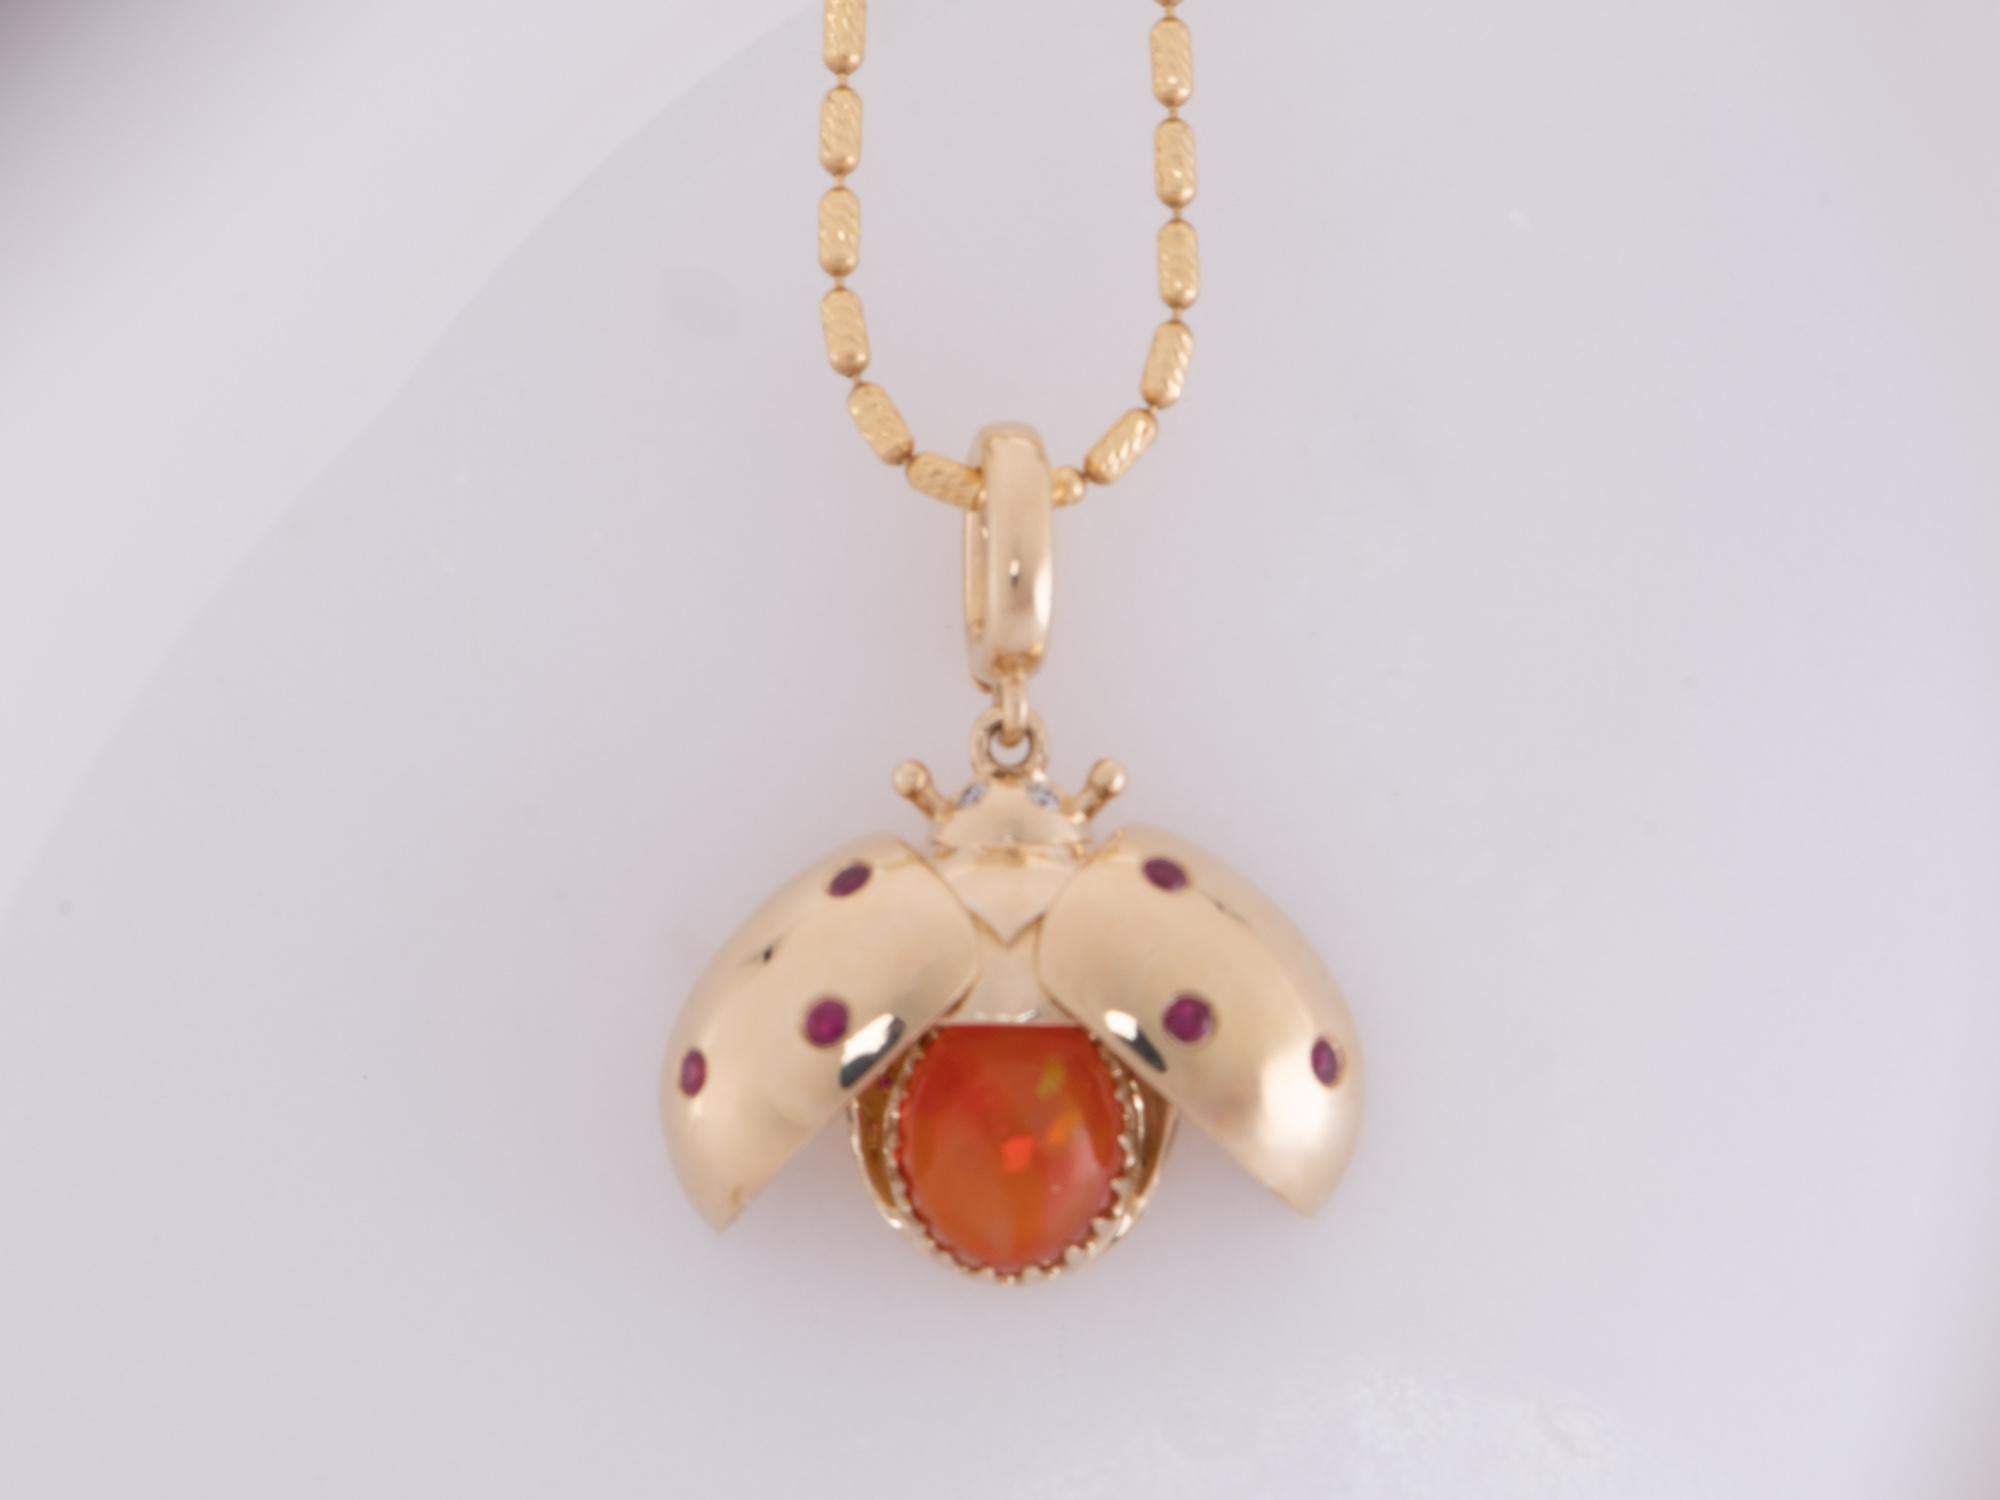 ♥ Mexican Fire Opal Ladybug Pendant Moving Wings 14K Gold Ruby Diamond Spots
♥ The item measures 23mm in length including the bail, 11.6mm in width, and 6.2mm in height.
♥ Material: 14K Gold
♥ Gemstone: Opal, 0.93ct. Diamond, ruby
♥ All stone(s)